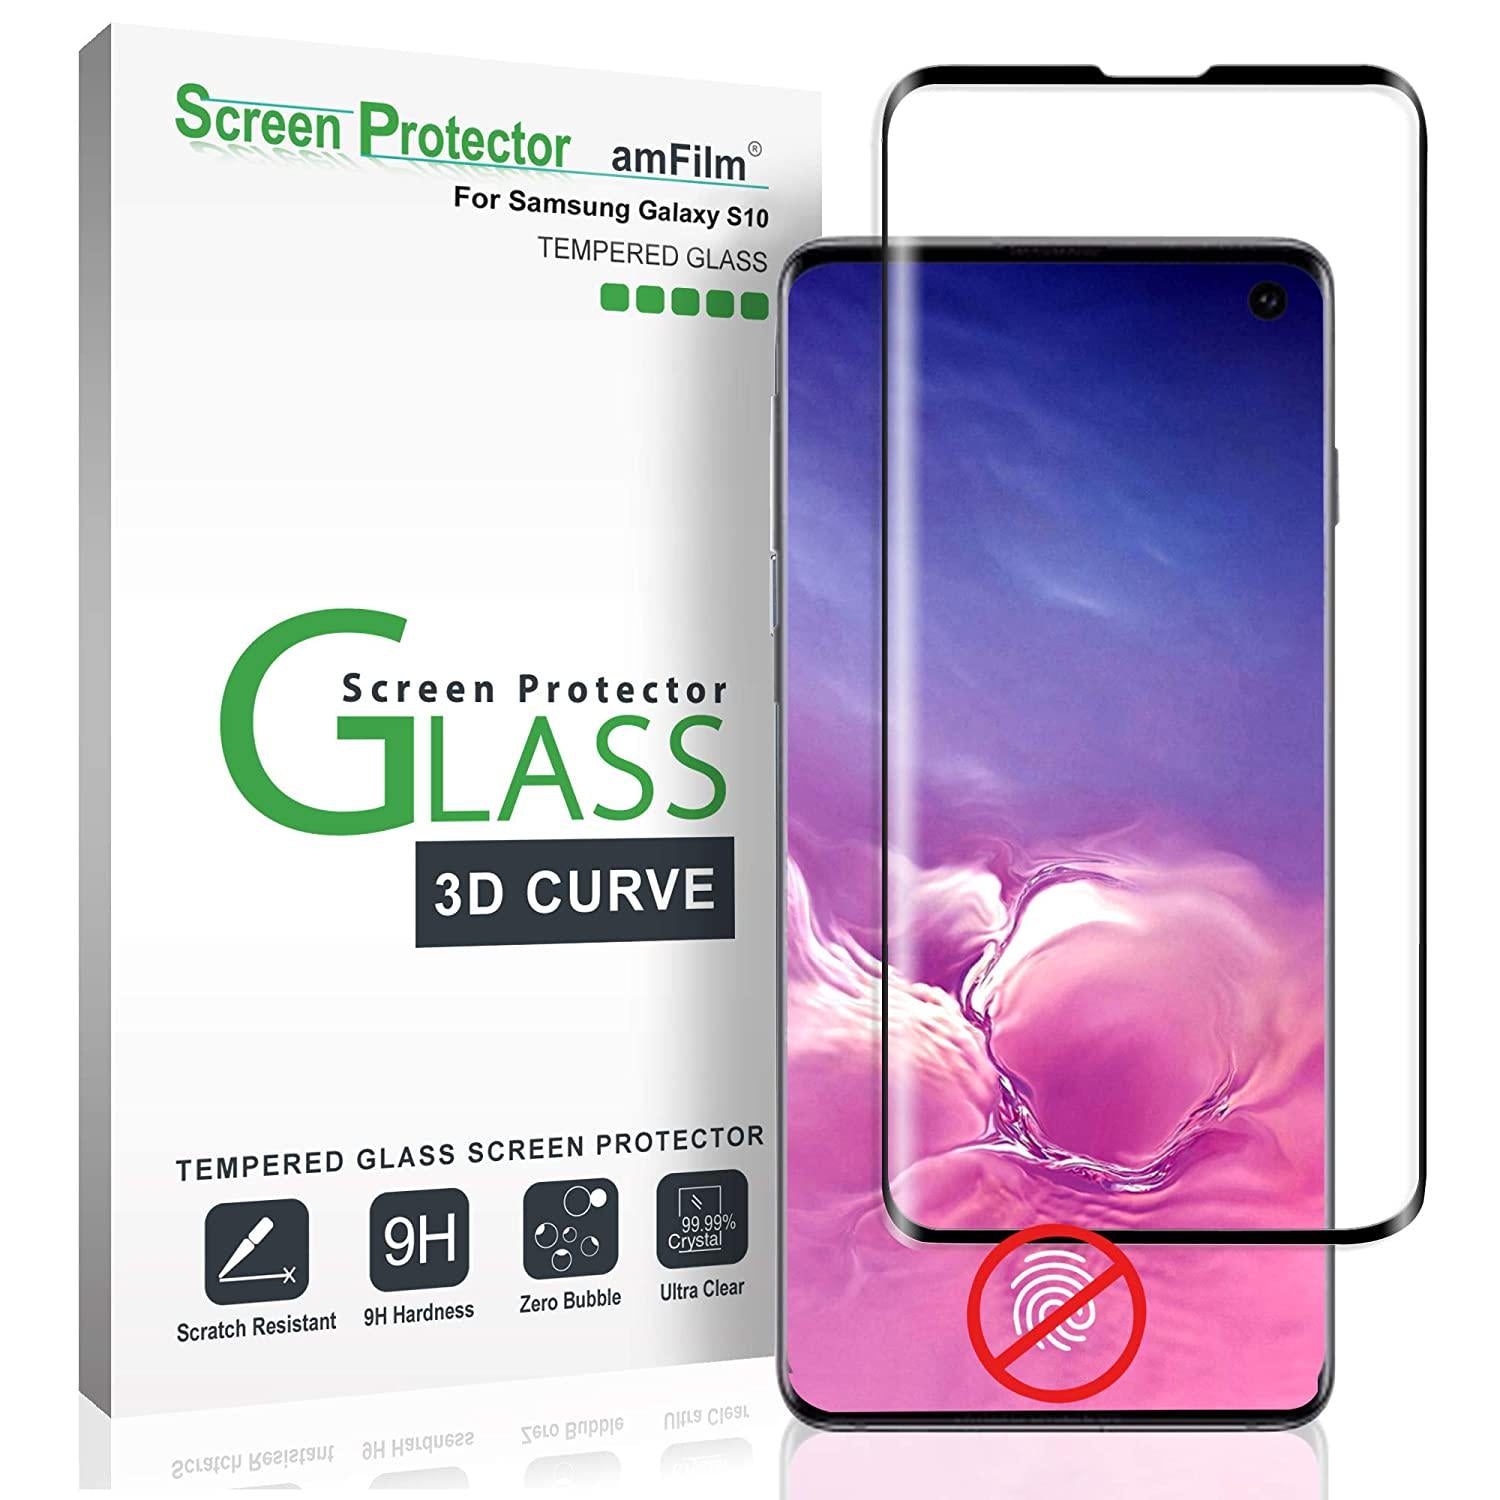 amFilm, Galaxy S10 Screen Protector Glass, amFilm Full Cover (Not Compatible with Fingerprint Scanner) Tempered Glass Screen Protector Film with Dot Matrix for Samsung Galaxy S10 (Black)